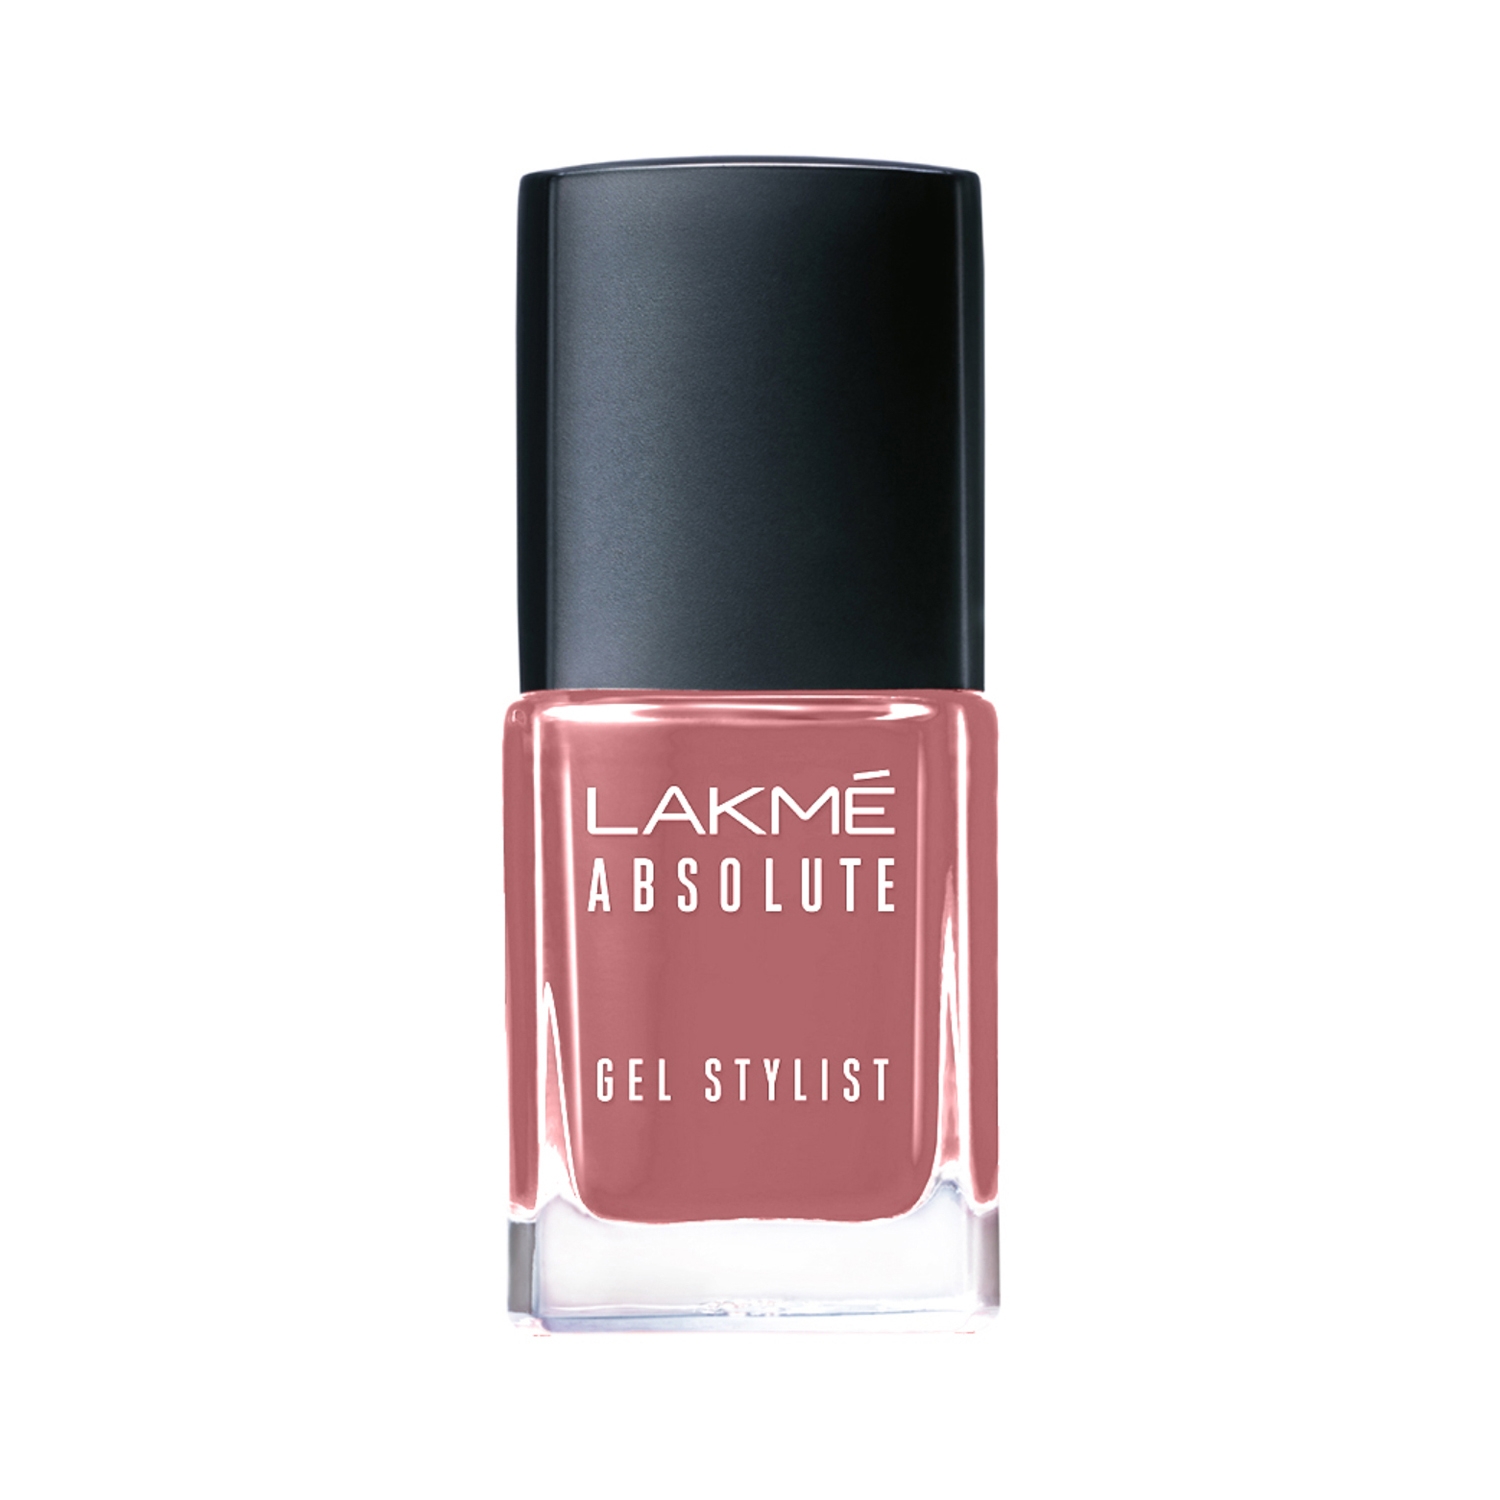 Lakme Absolute Gel Stylist Nail Color Scarlet Red 12 ml - the best price  and delivery | Globally